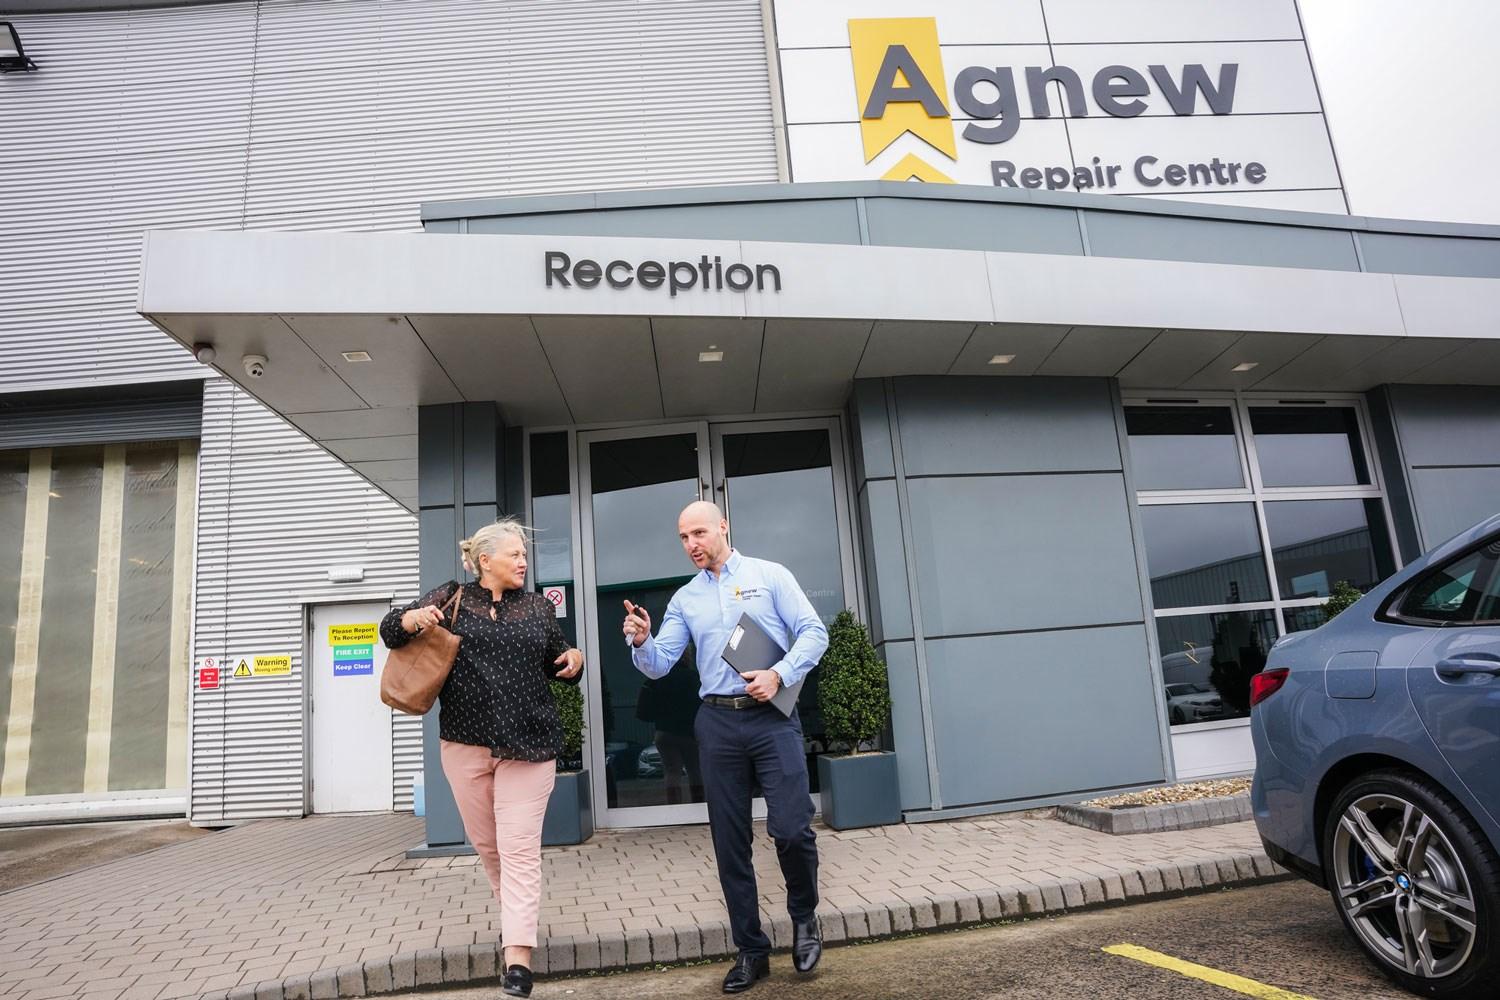 Agnew Repair Centre Vehicle Damage Specialist walks with customer towards their vehicle outside of the Agnew Repair Centre Reception